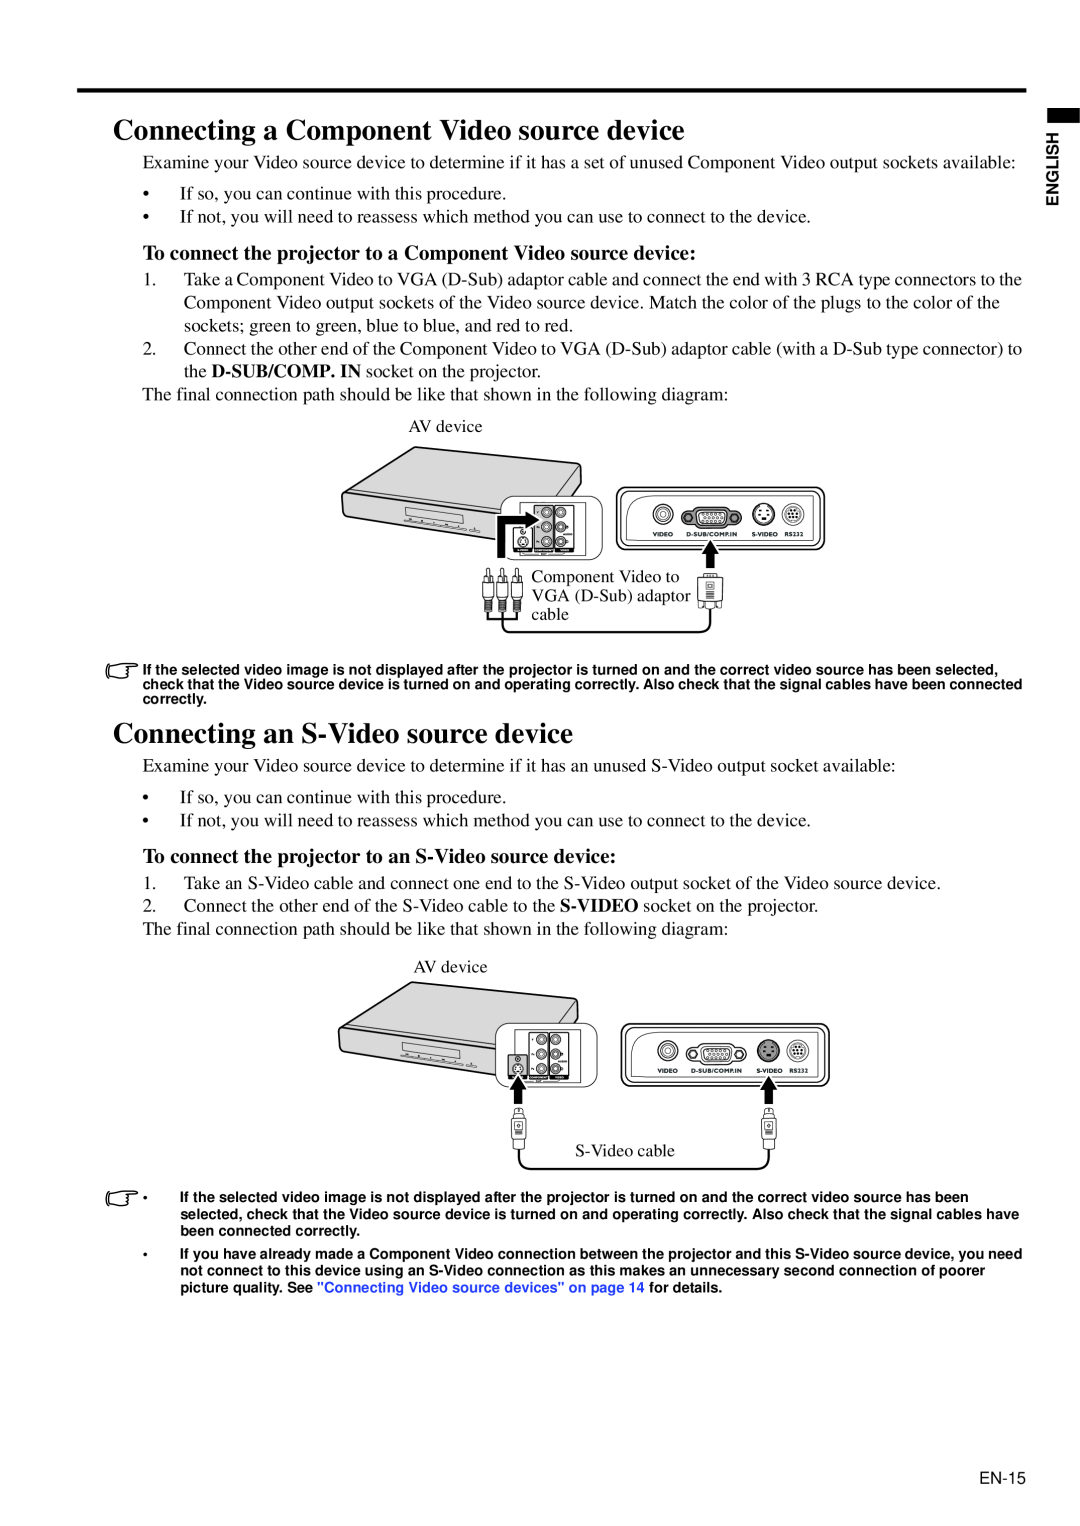 Mitsubishi Electronics XD95U user manual Connecting a Component Video source device, Connecting an S-Video source device 